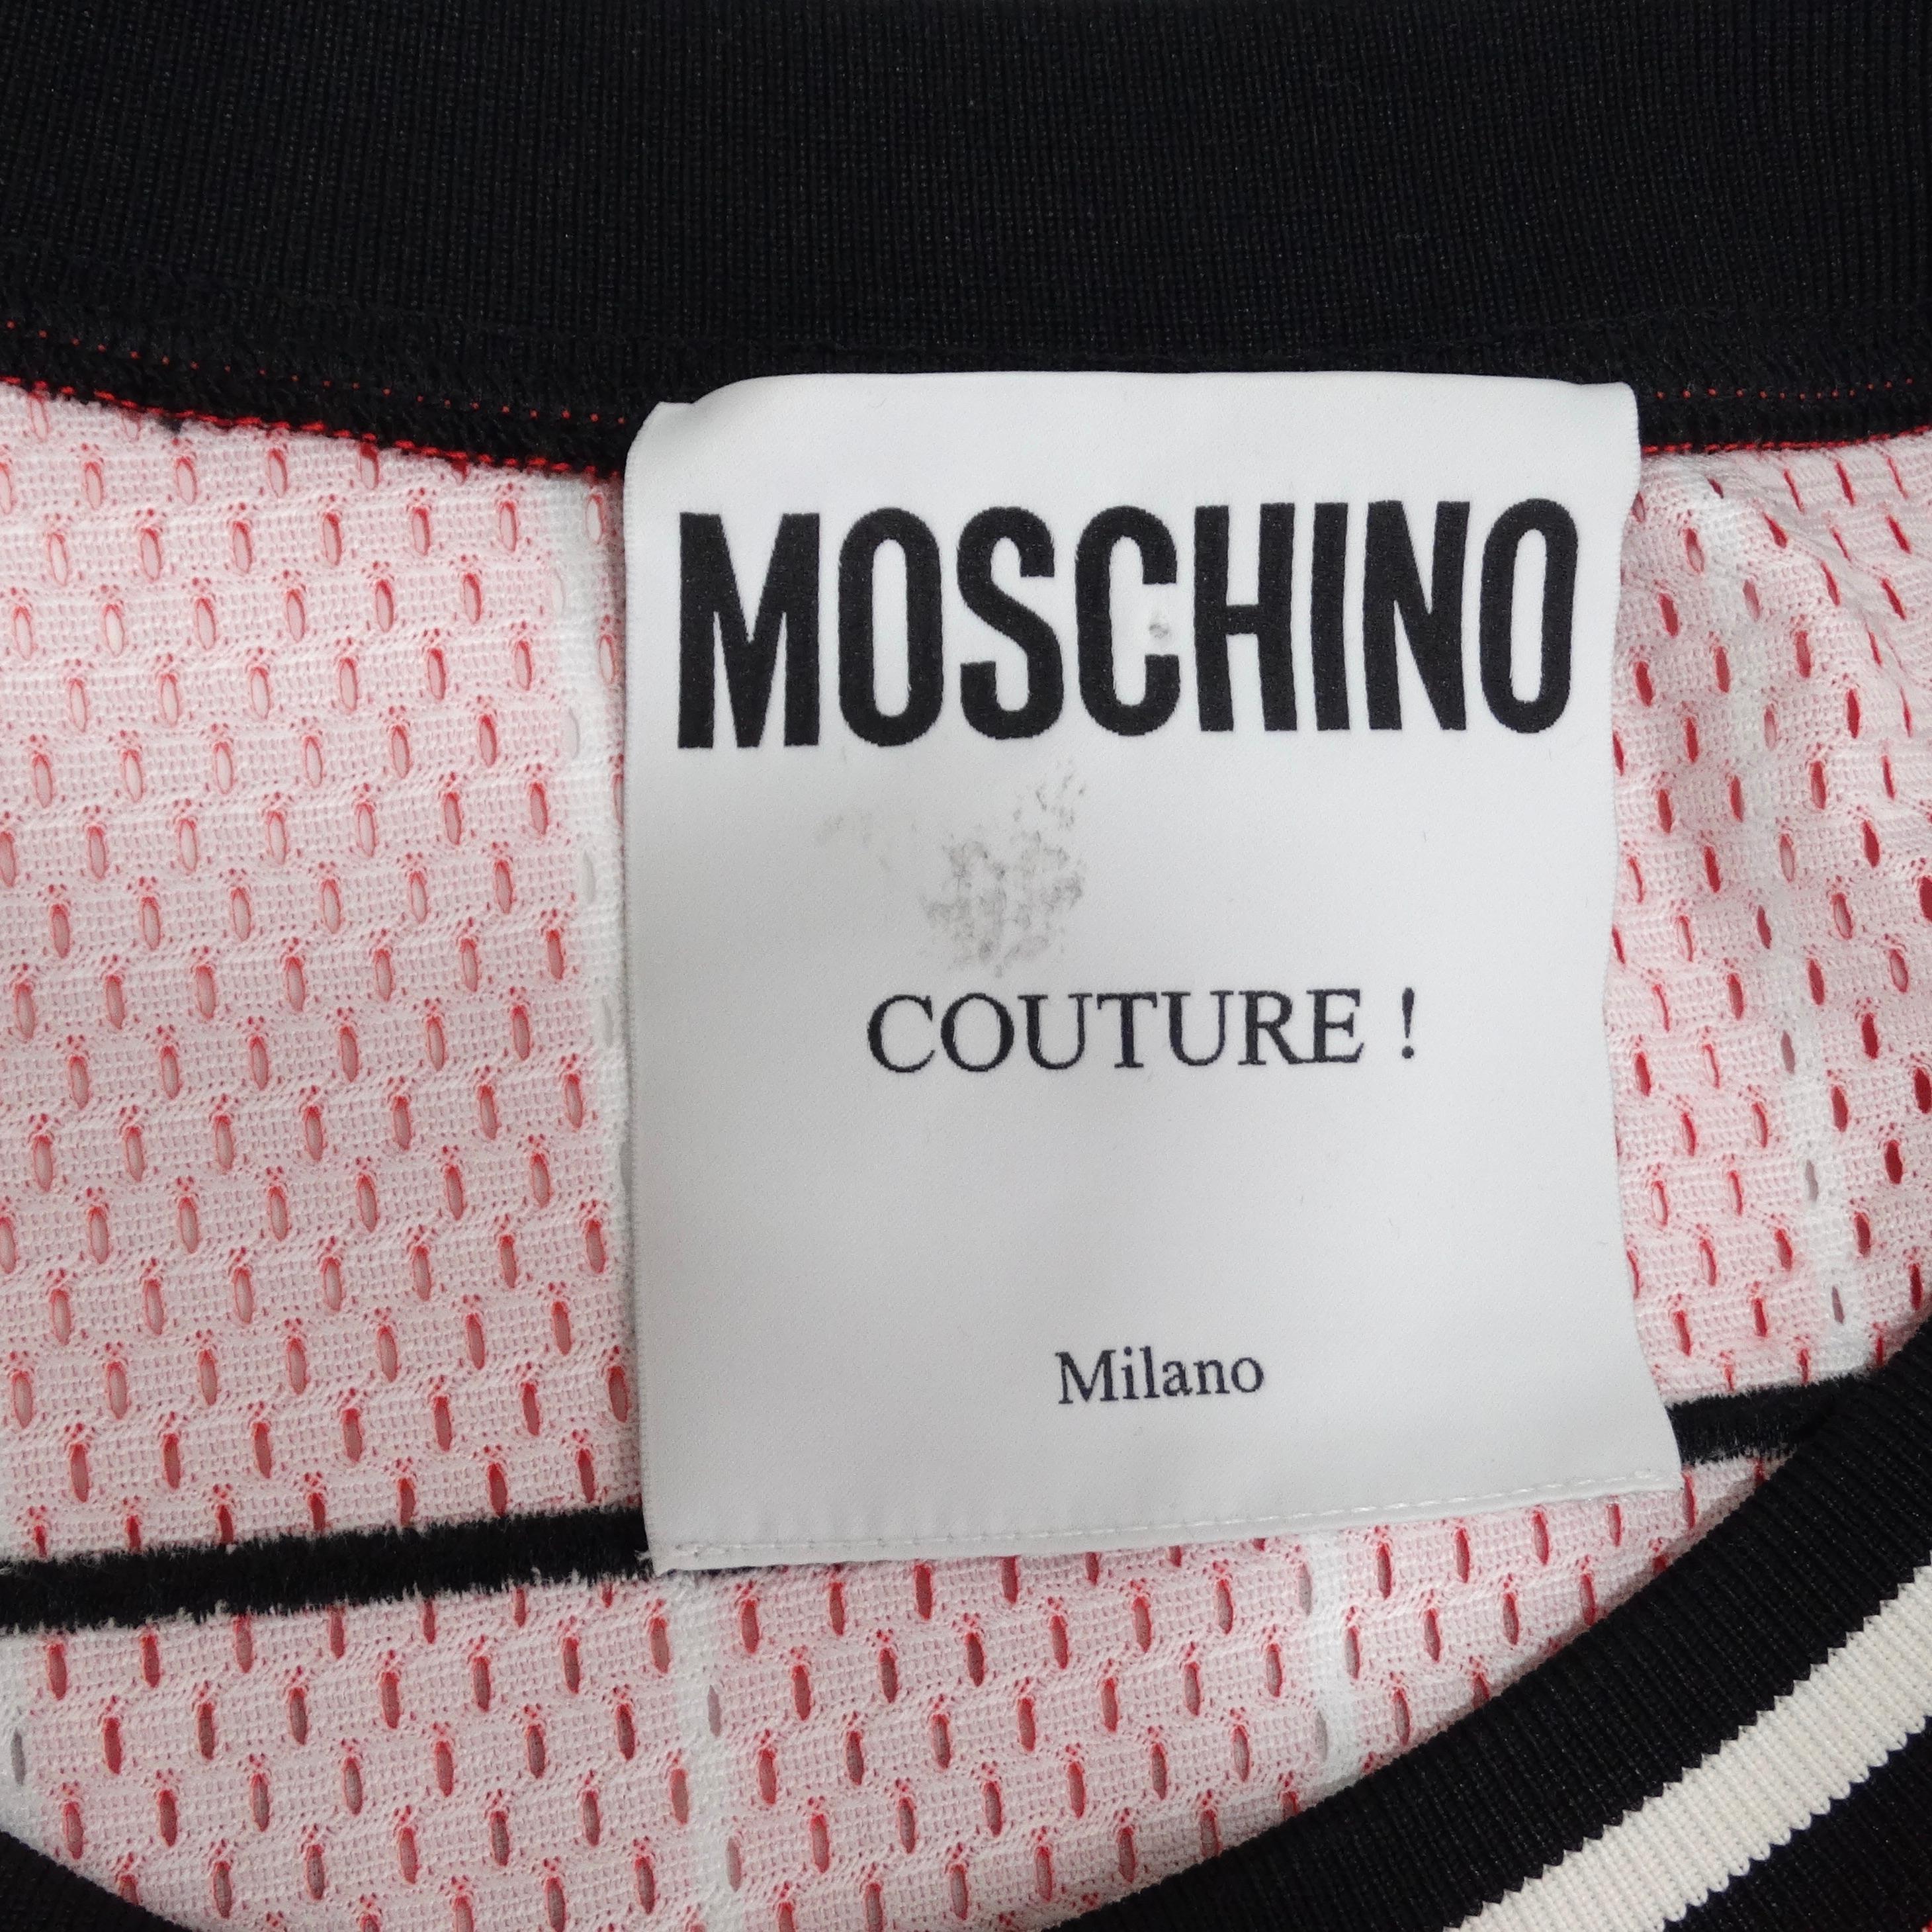 Moschino Couture Bugs Bunny Basketball Jersey  For Sale 1